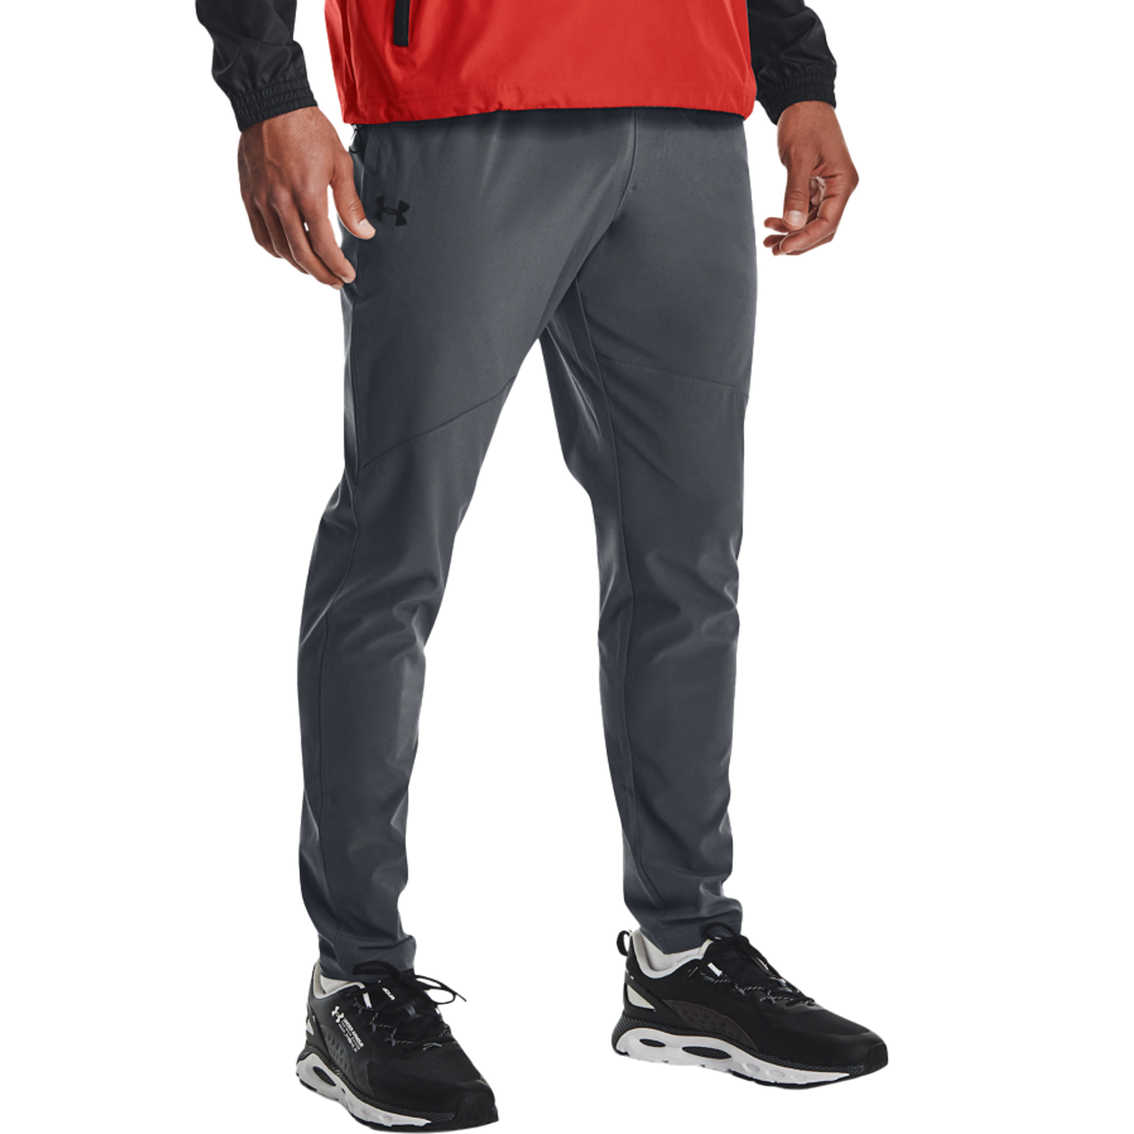 Under Armour Stretch Woven Pants | Pants | Clothing & Accessories ...